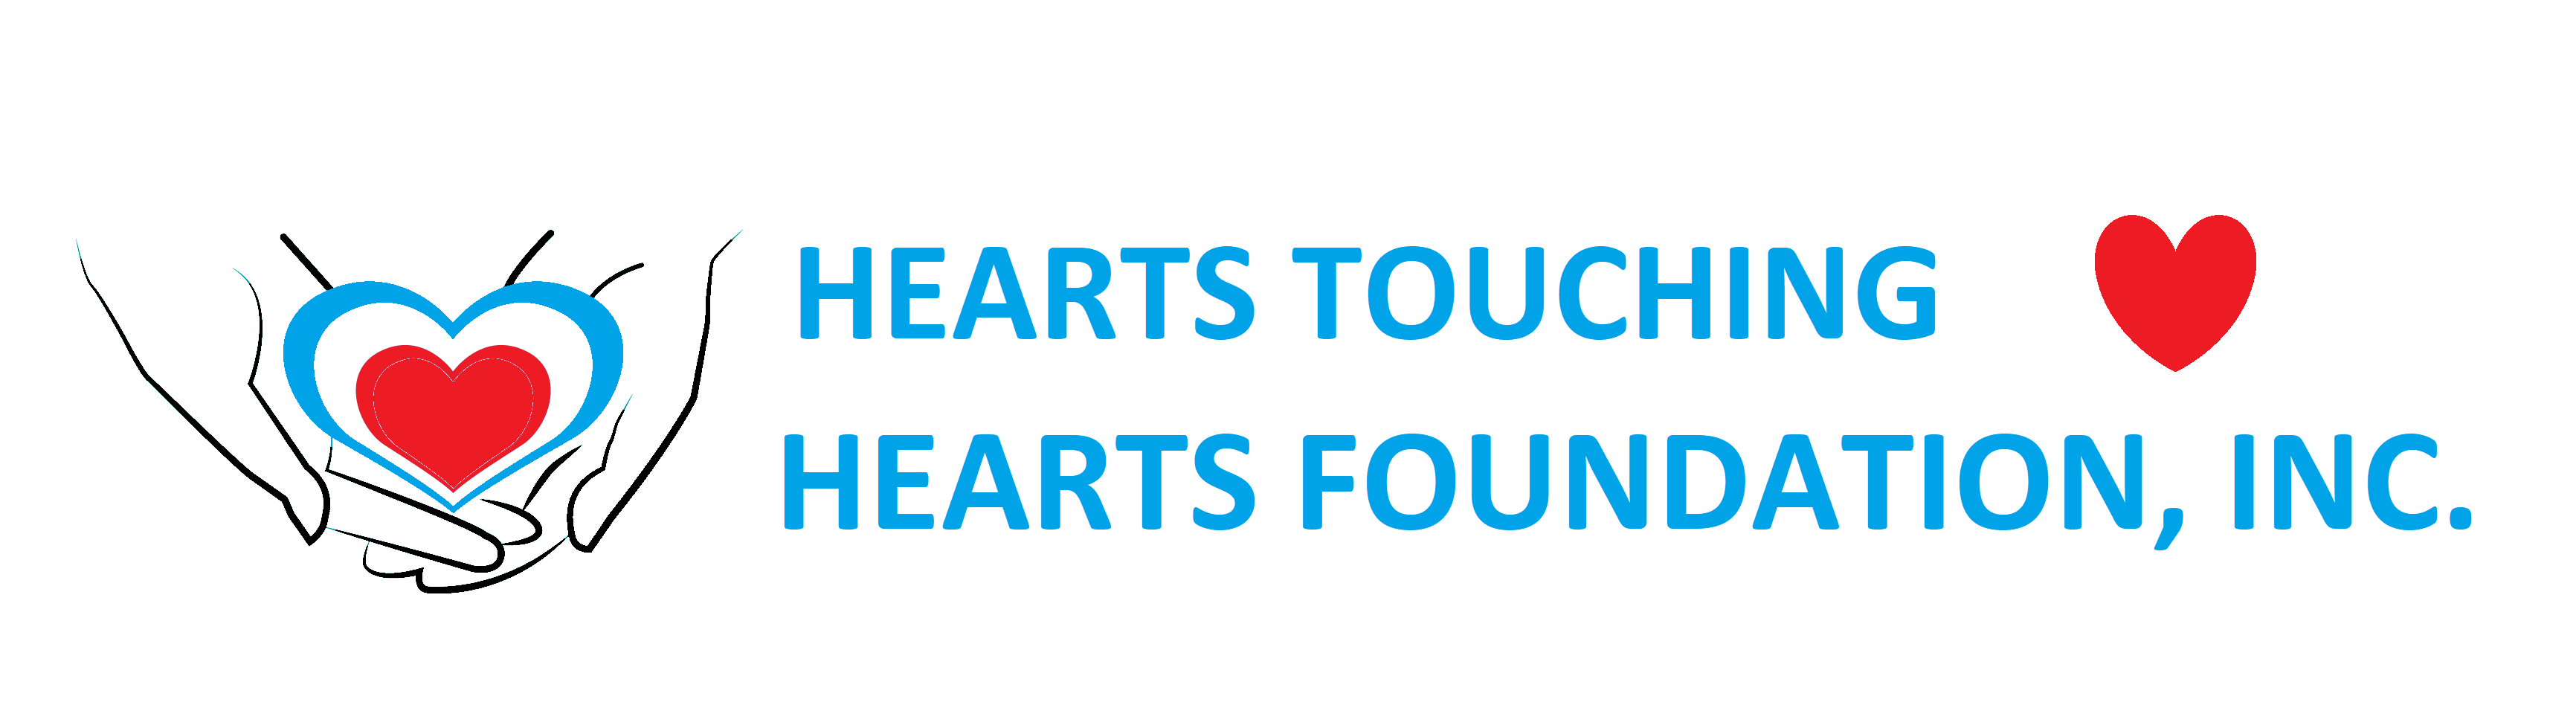 Hearts Touching Hearts Foundation